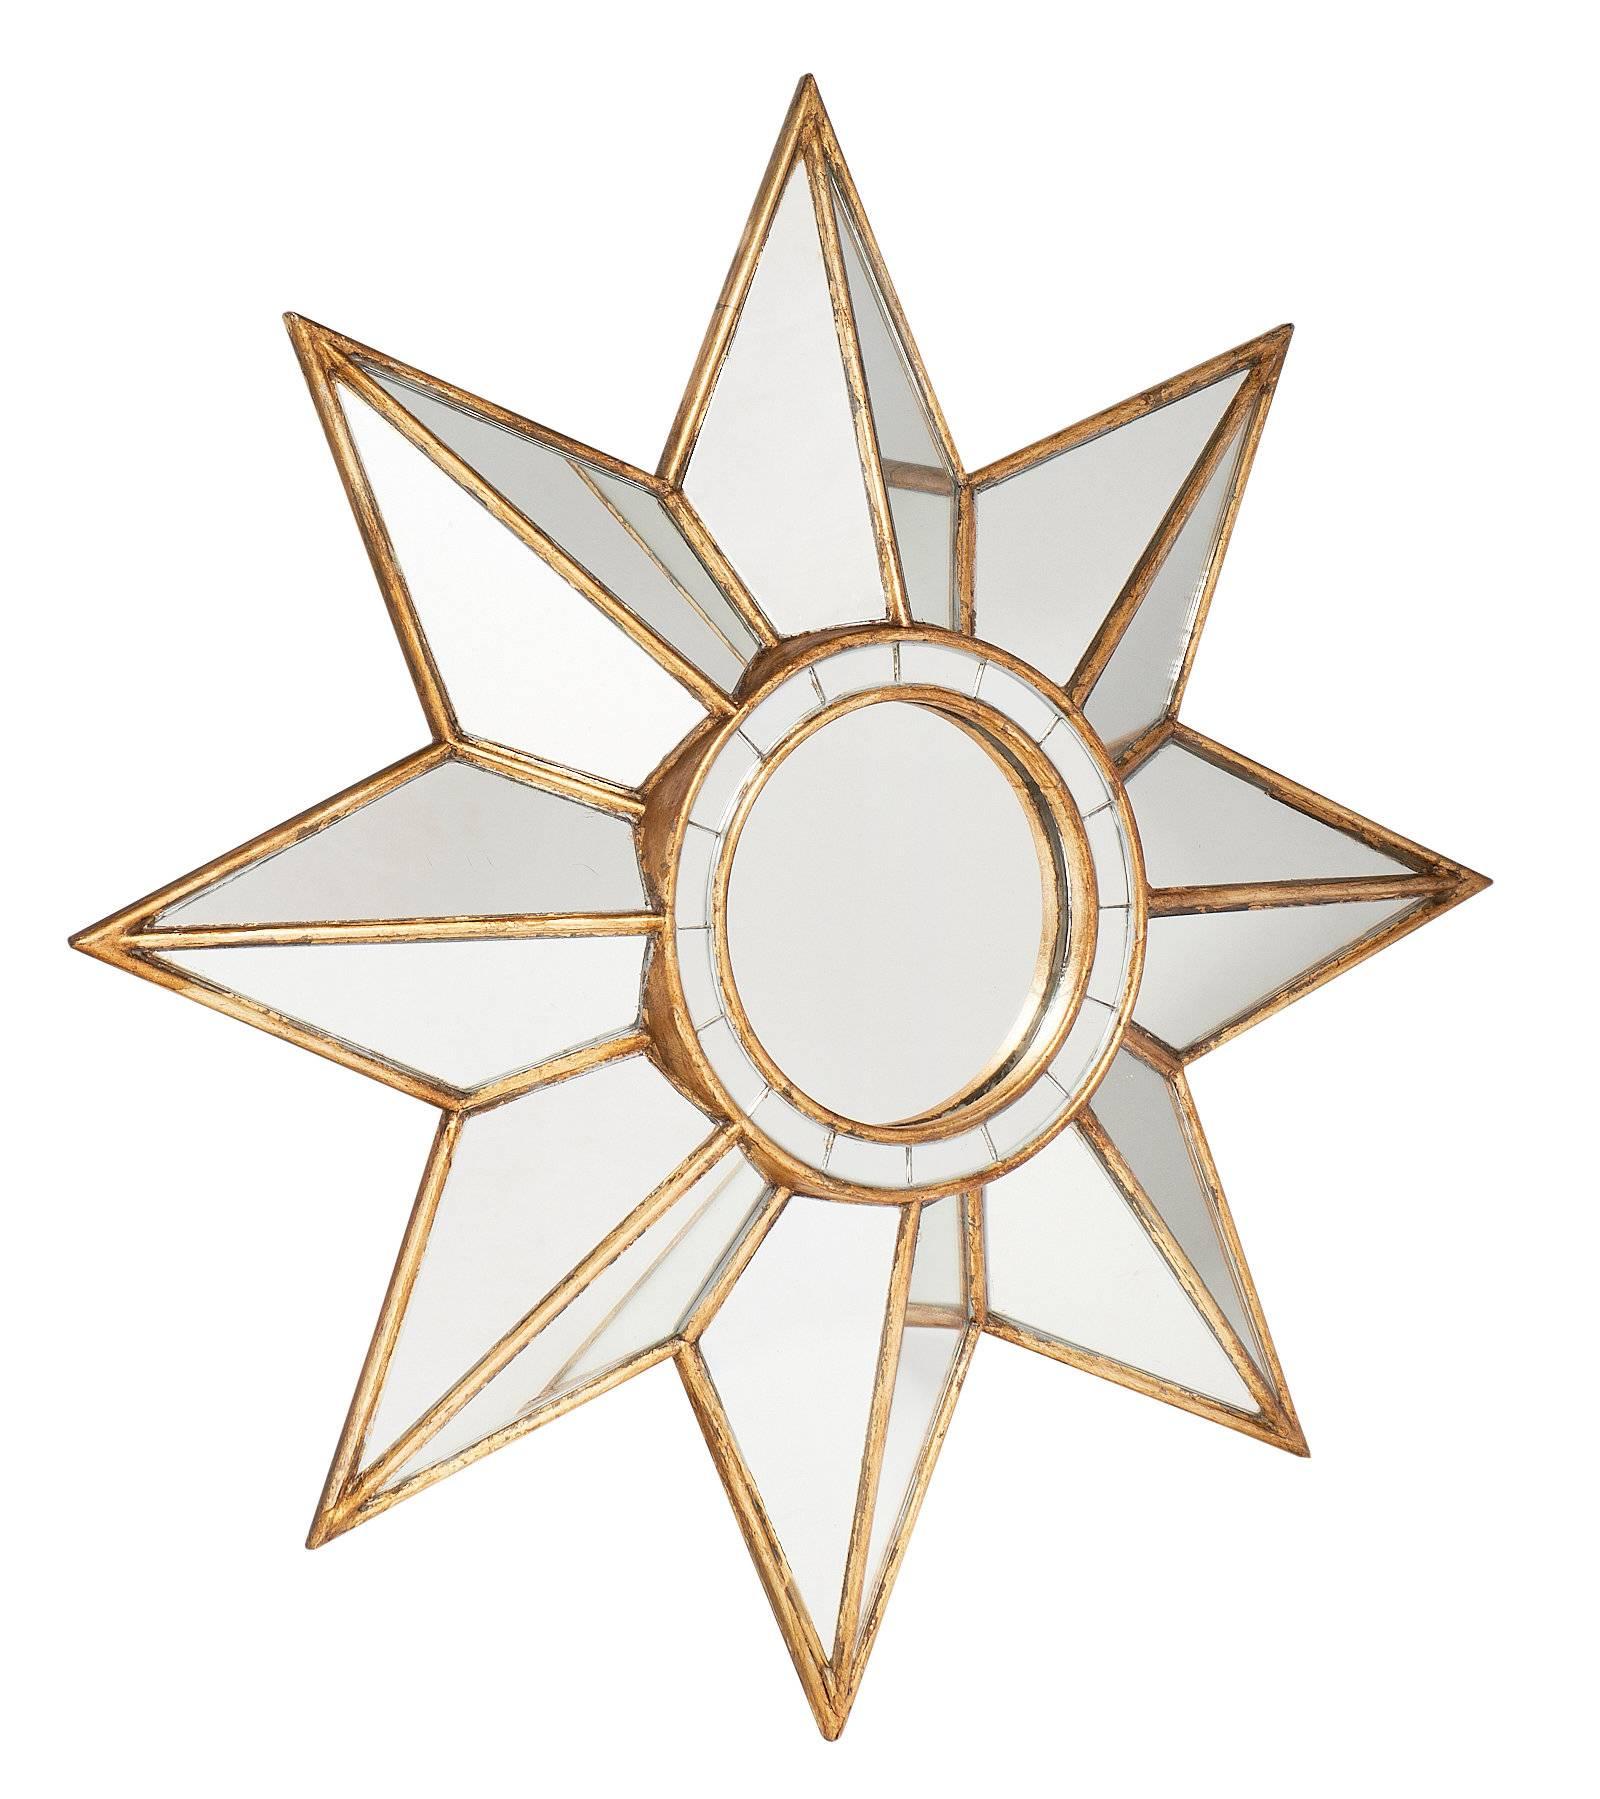 Wonderful star mirror from France. This piece features a central circle mirror, framed by eight points of the star, each also mirrored. We love the size and impact of this lovely piece.